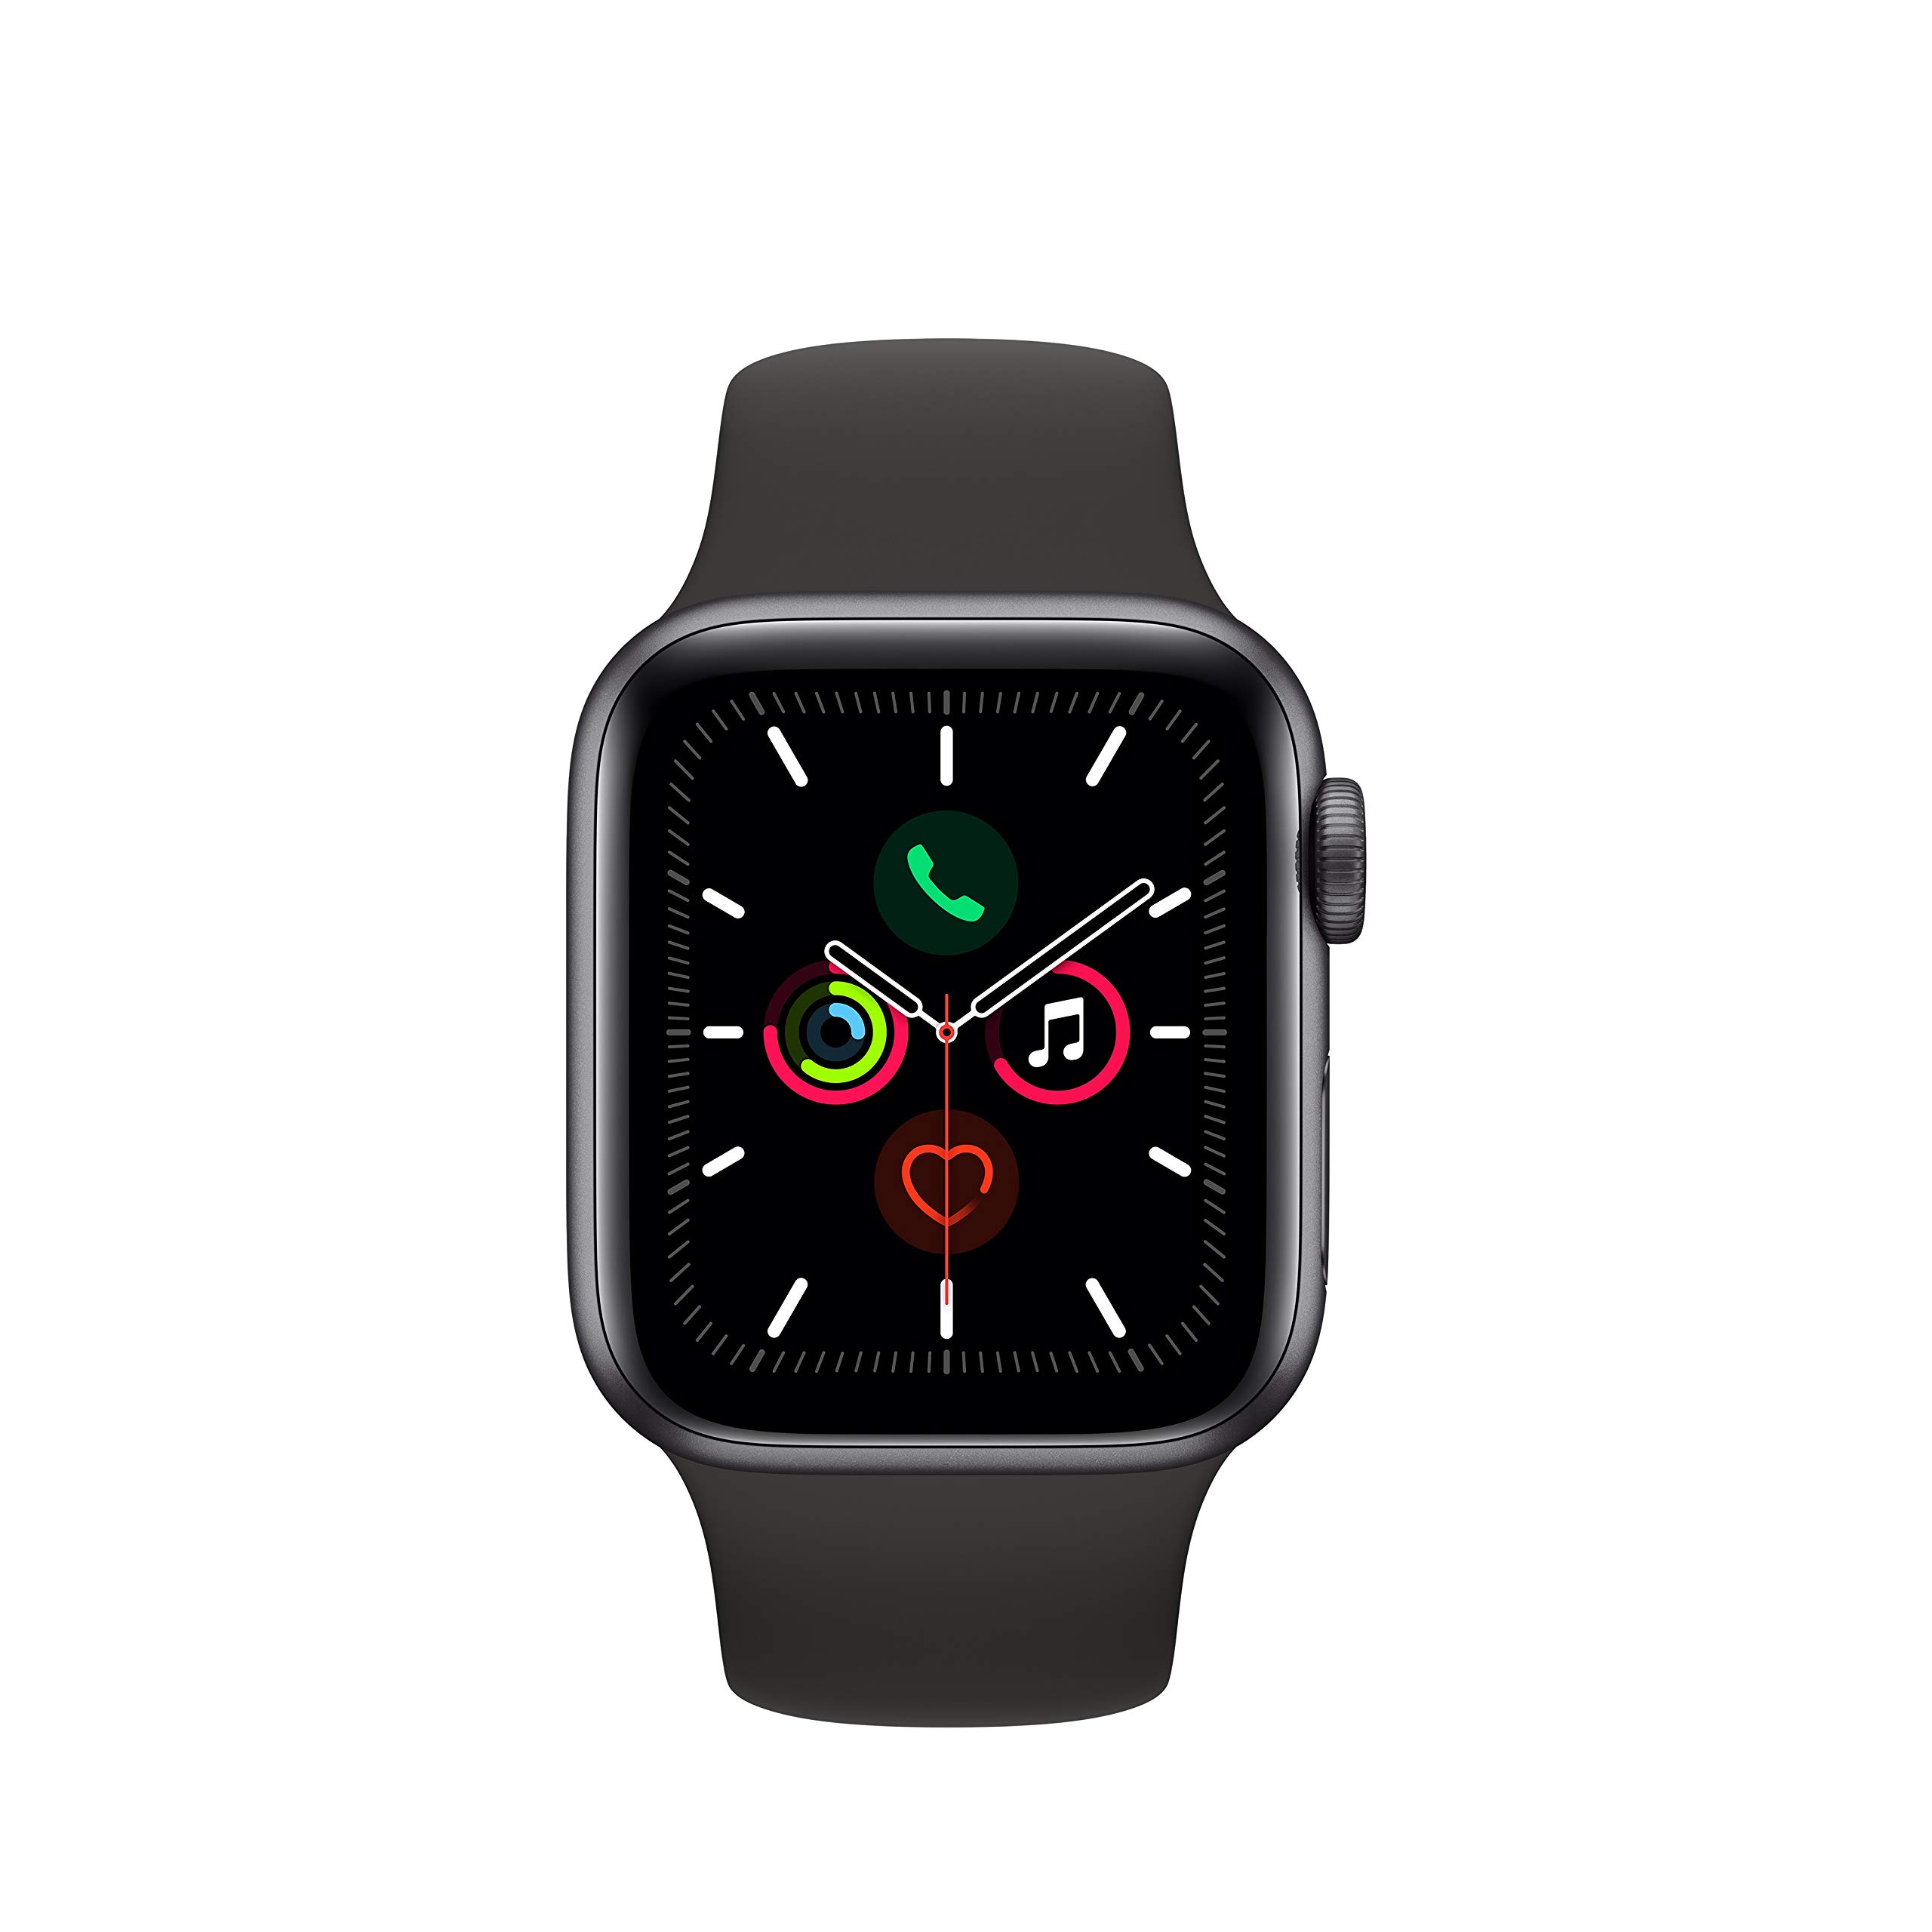 Apple Watch Series 5 (GPS + Cellular, 44mm) - Space Gray Aluminum Case with Black Sport Band